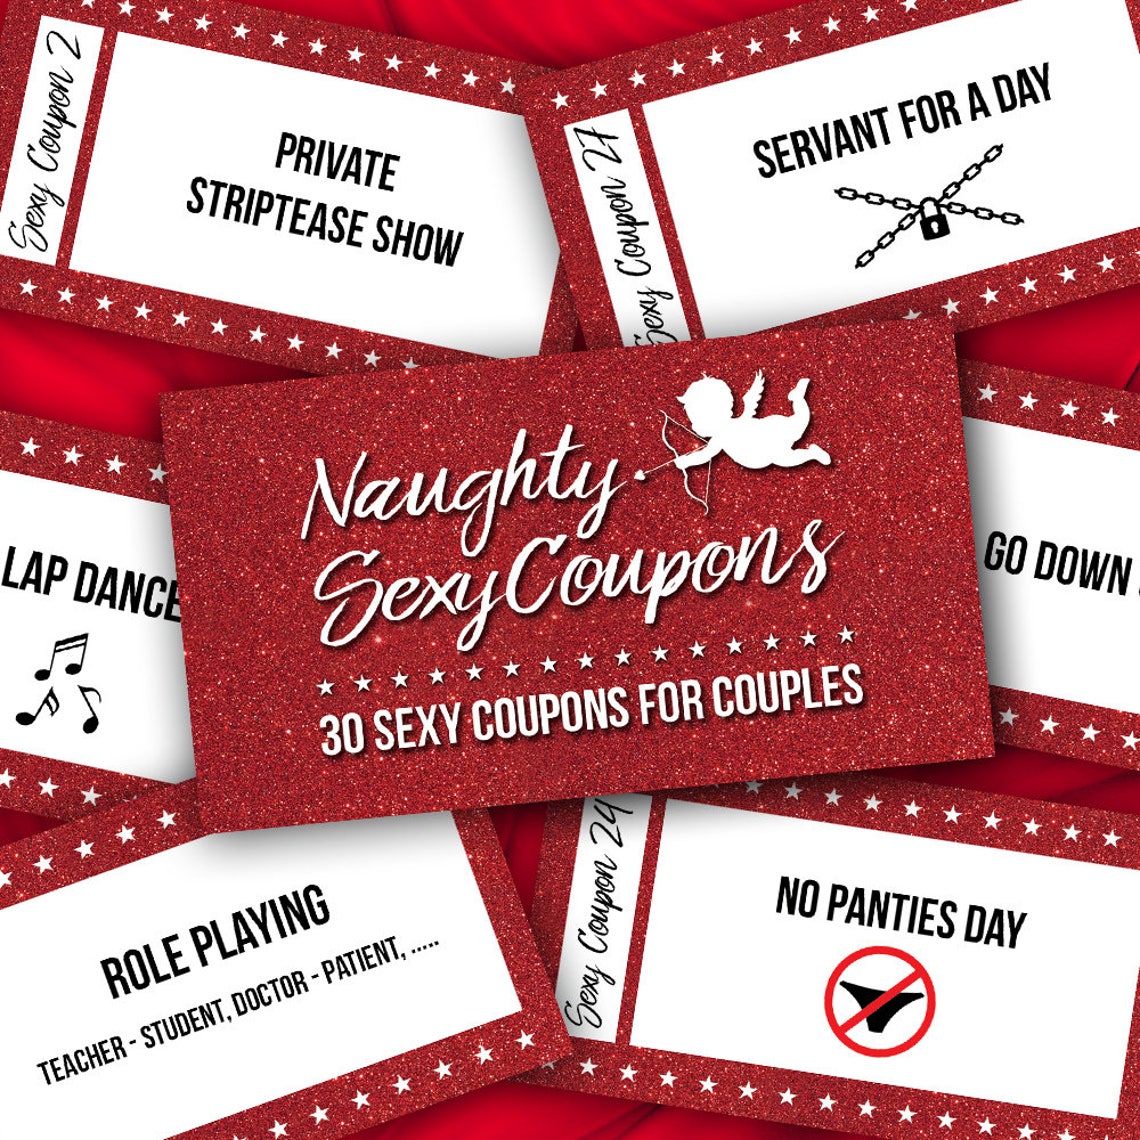 Naughty Coupon Book Sex Coupons Naughty Coupons Couples Etsy